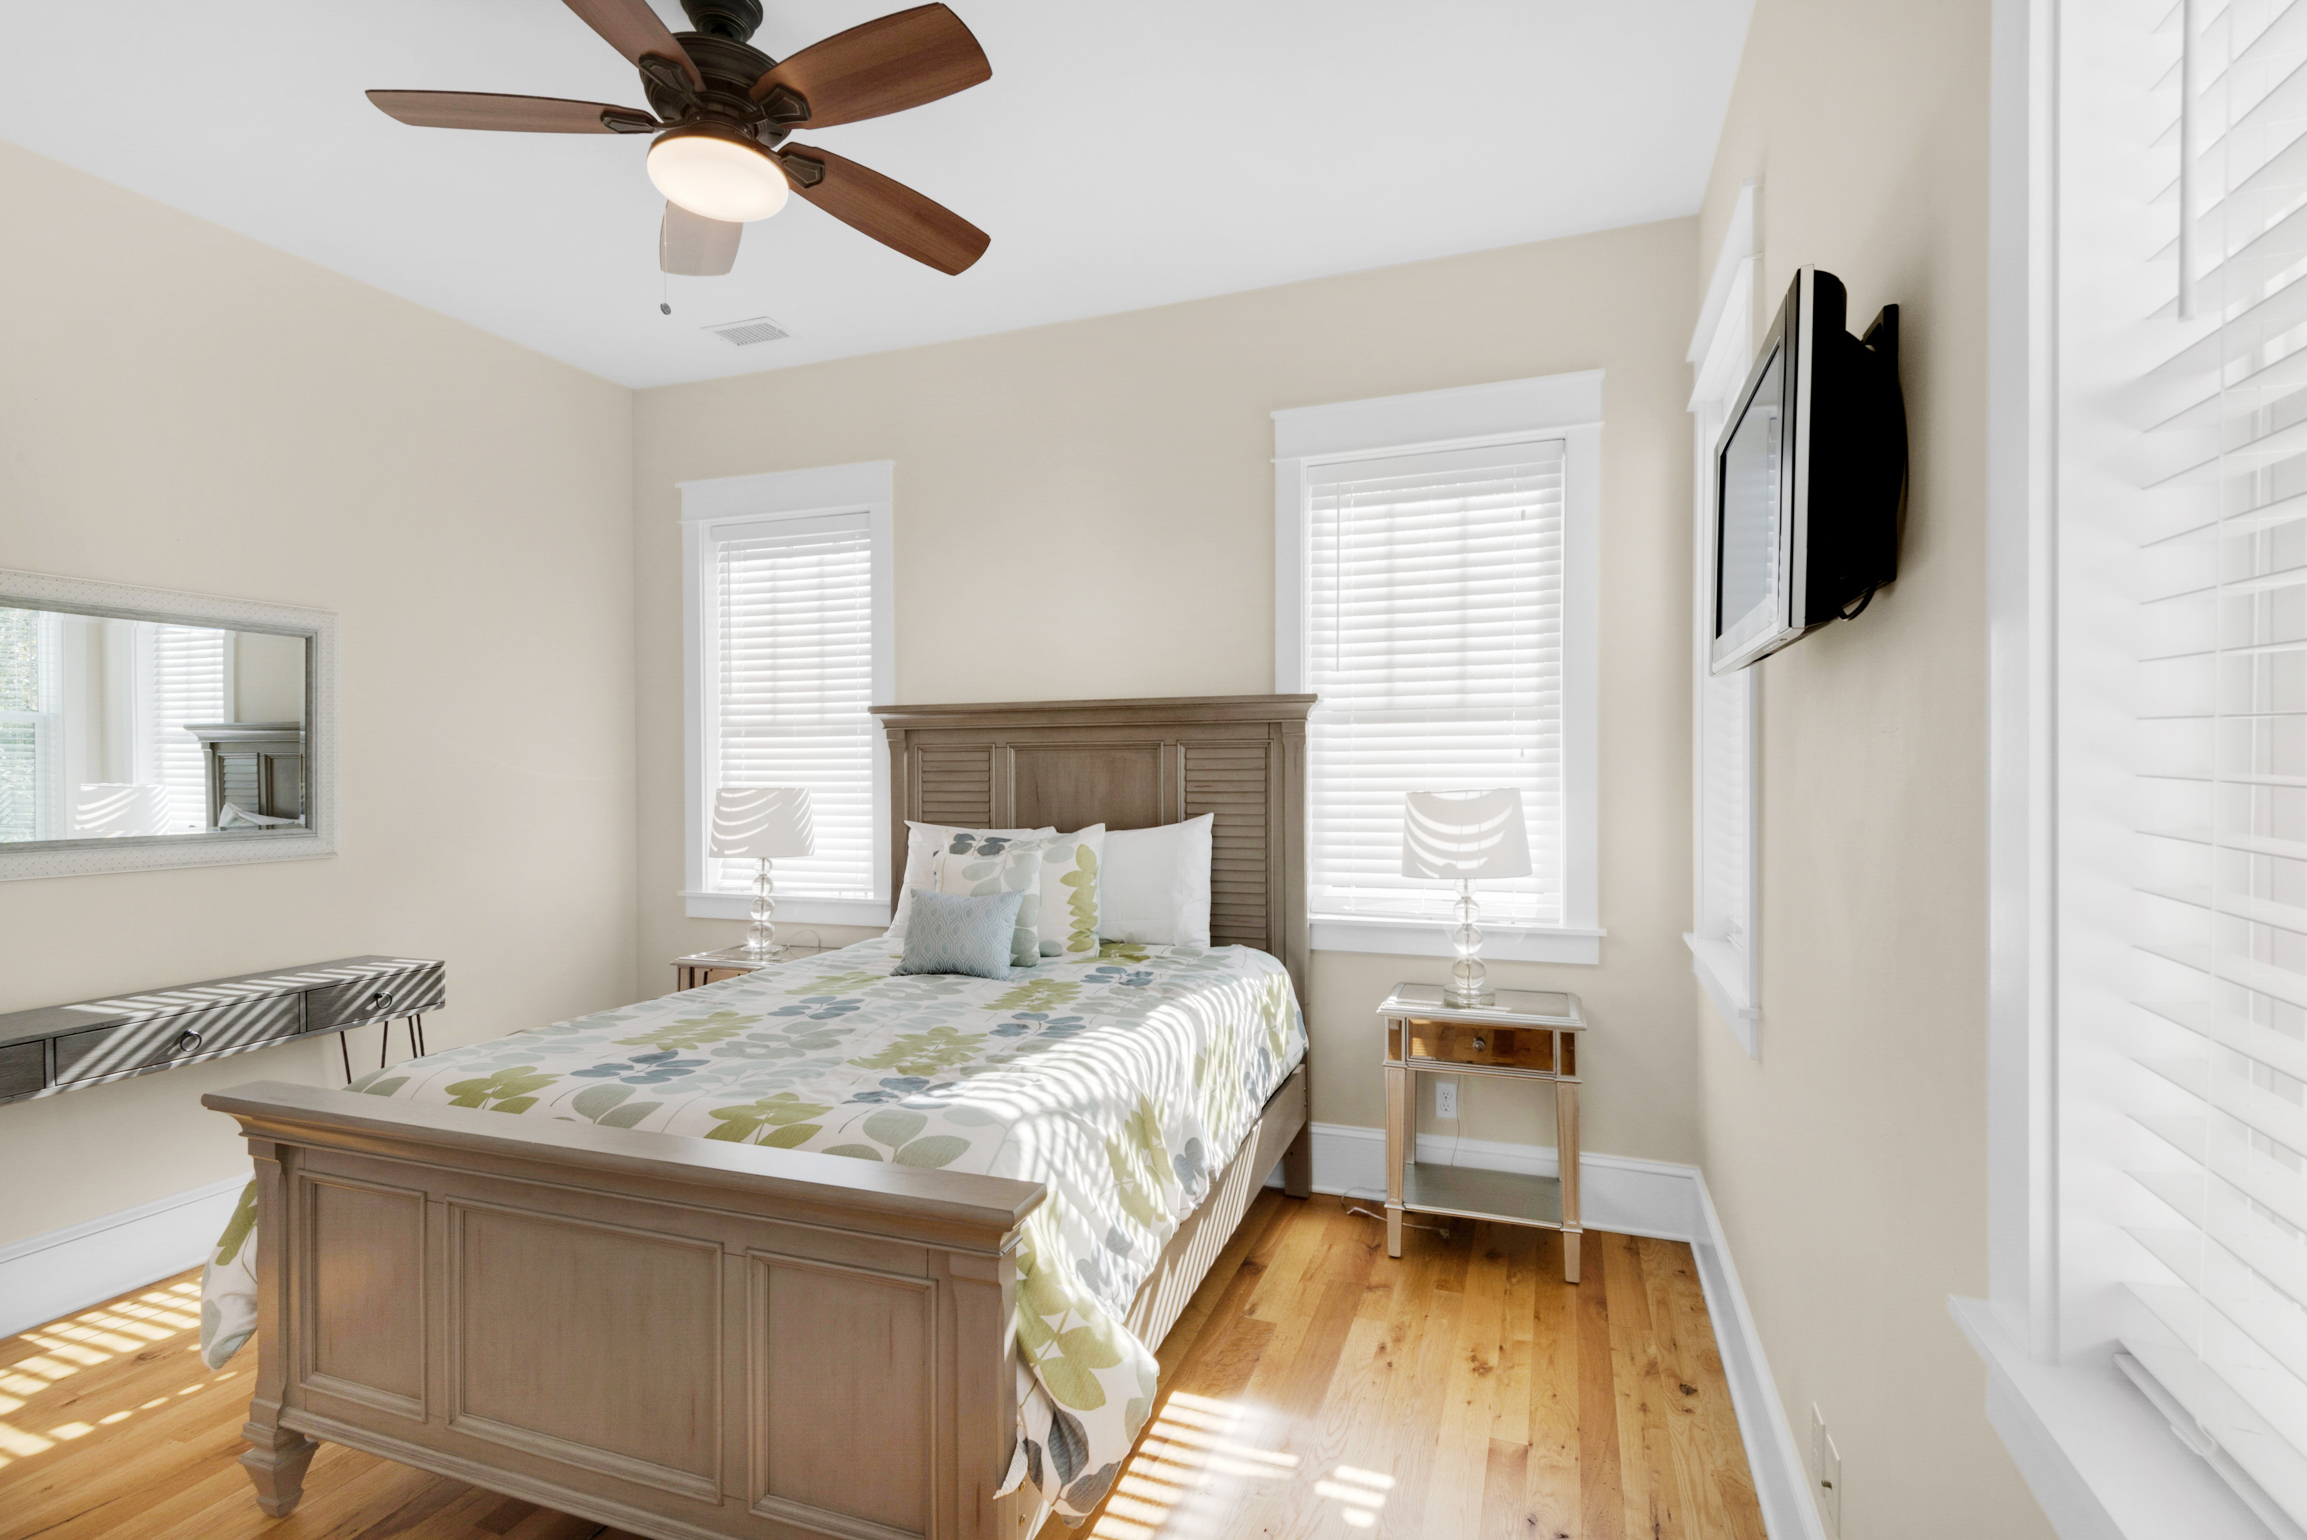 Guest bedroom is light and airy